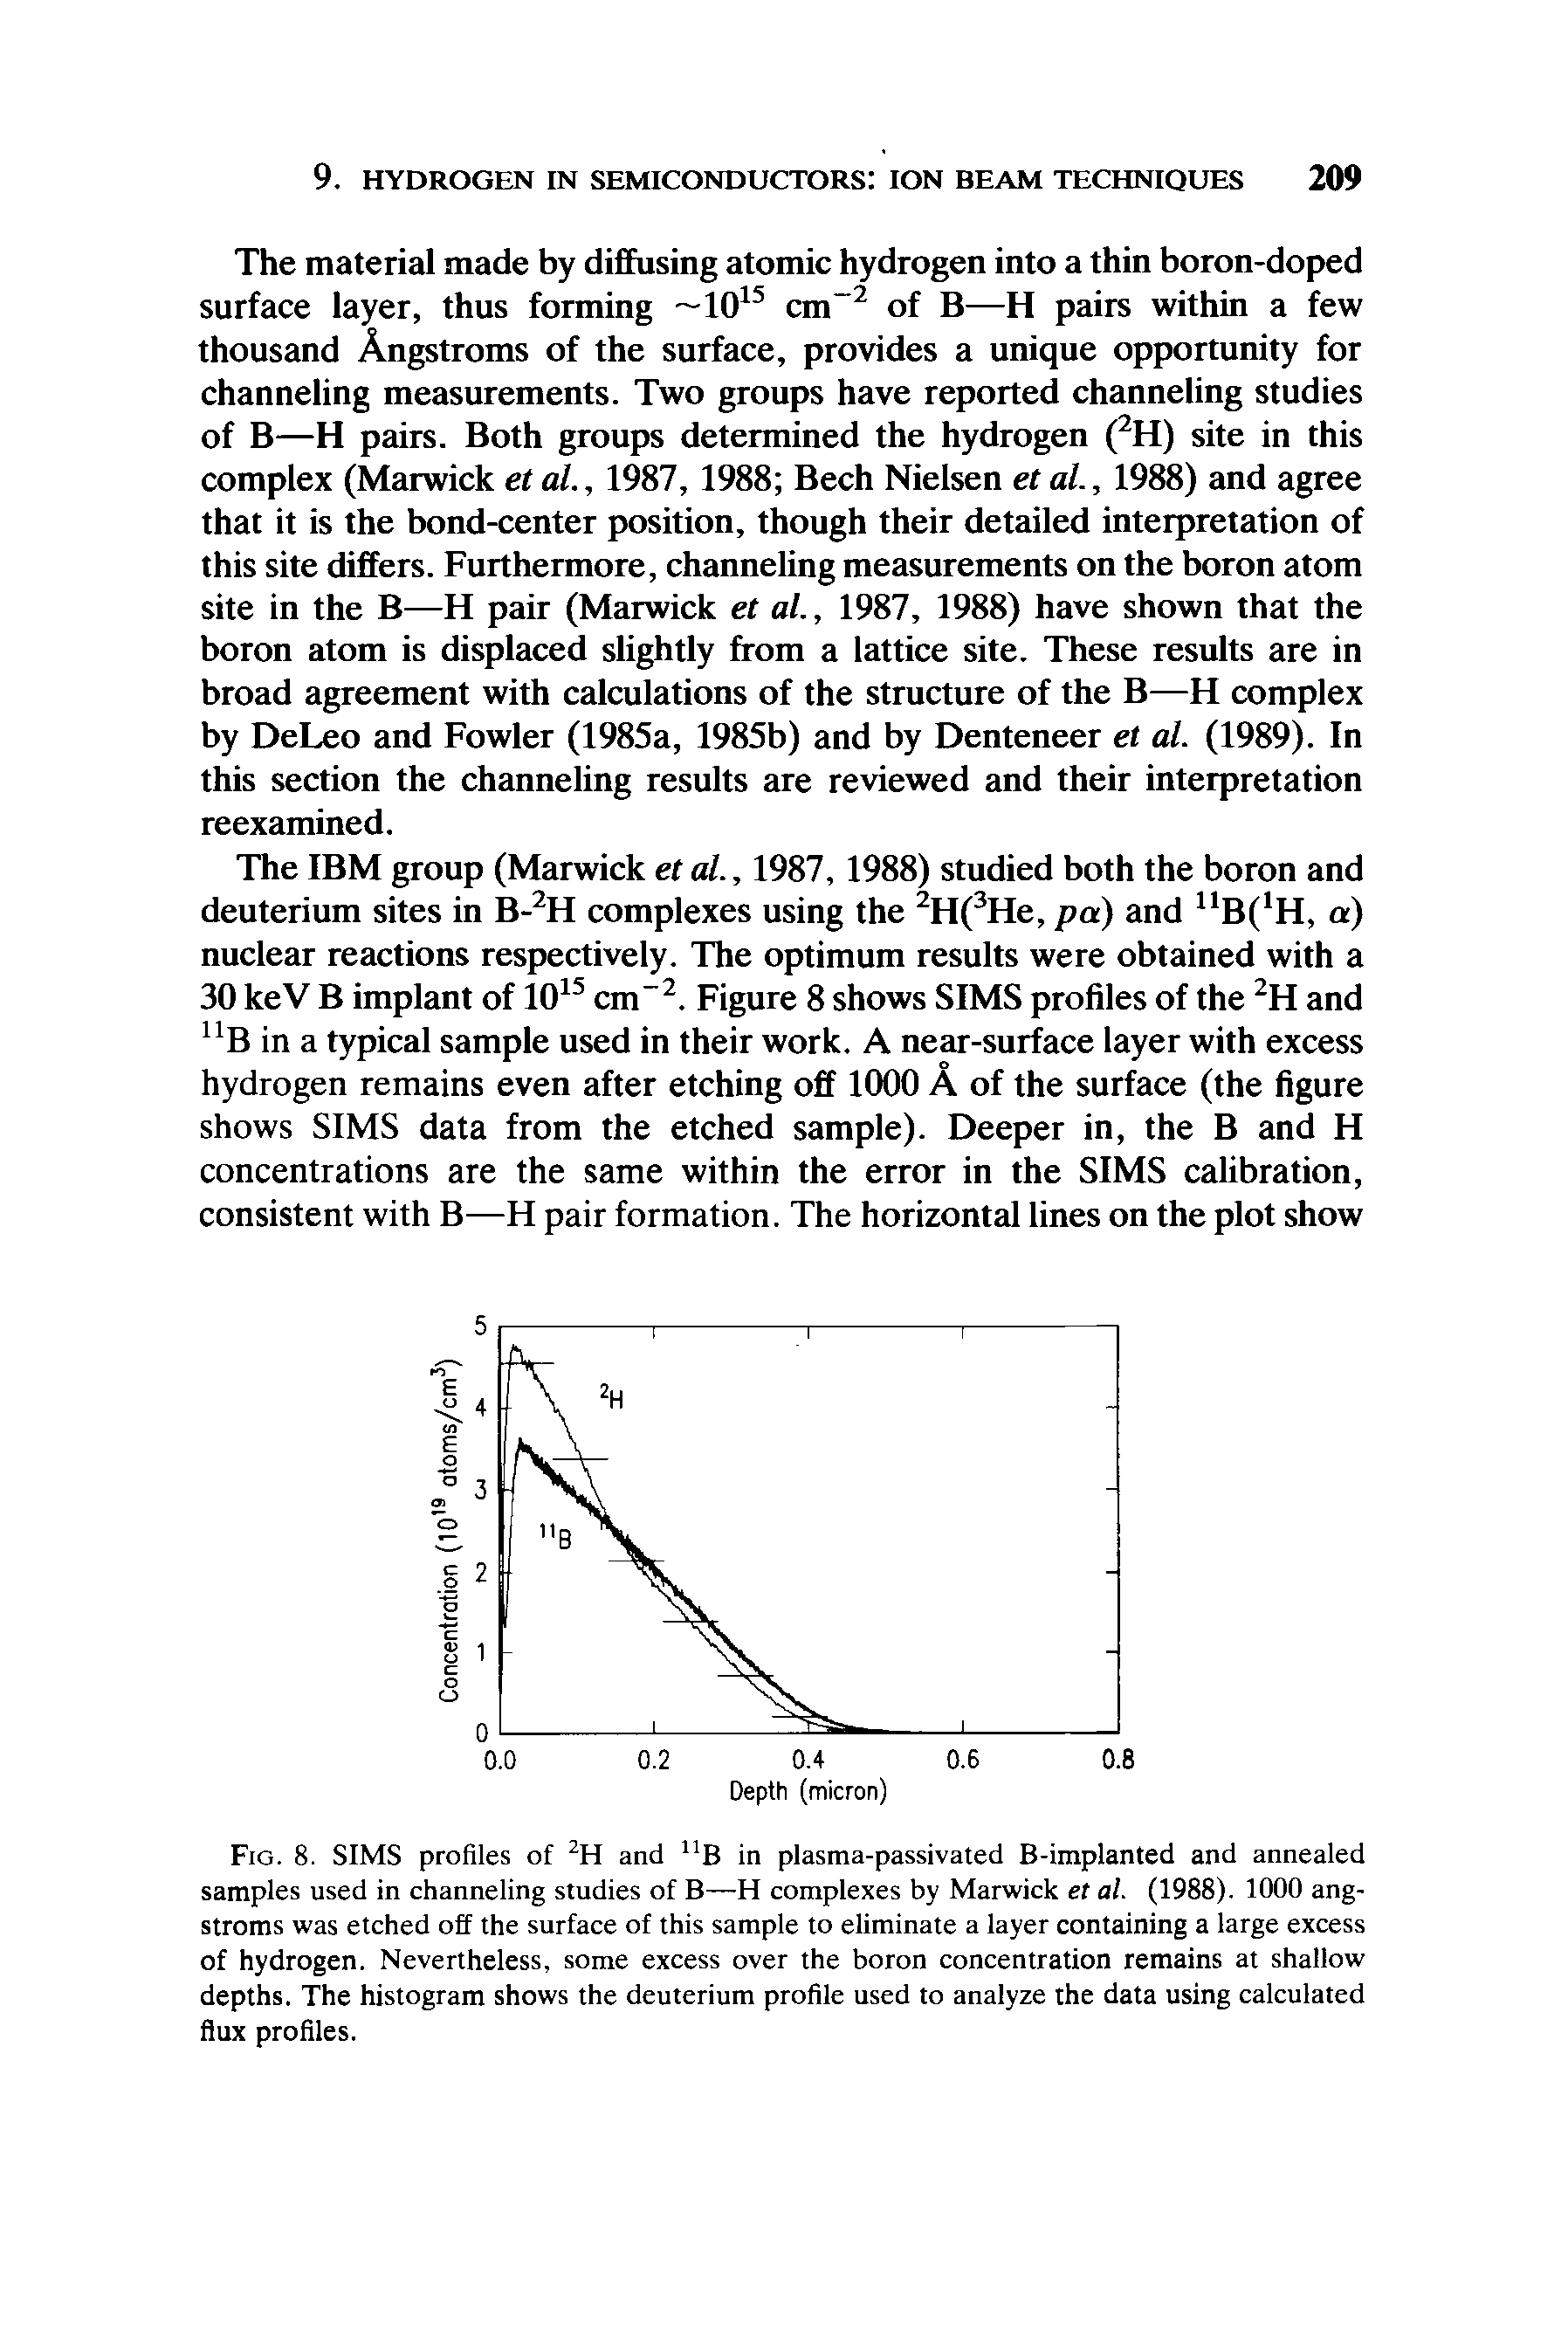 Fig. 8. SIMS profiles of 2H and nB in plasma-passivated B-implanted and annealed samples used in channeling studies of B—H complexes by Marwick et al. (1988). 1000 angstroms was etched off the surface of this sample to eliminate a layer containing a large excess of hydrogen. Nevertheless, some excess over the boron concentration remains at shallow depths. The histogram shows the deuterium profile used to analyze the data using calculated flux profiles.